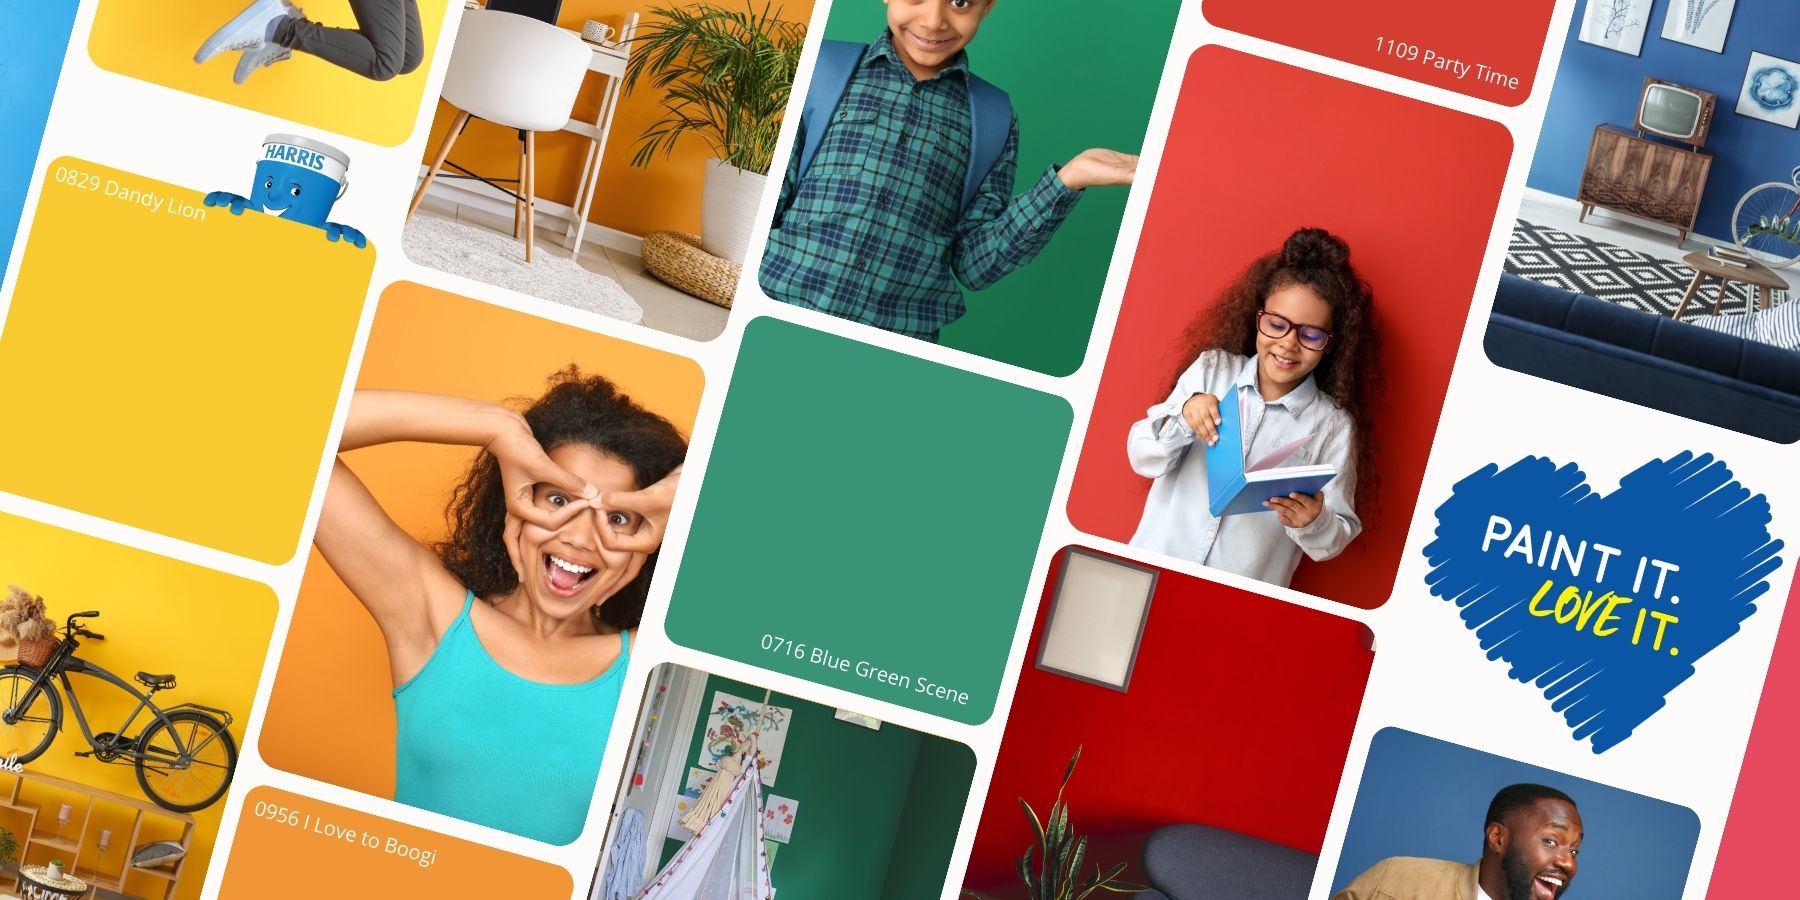 collage of picture featuring happy people, having fun in newly painted rooms, and featured paint colors.